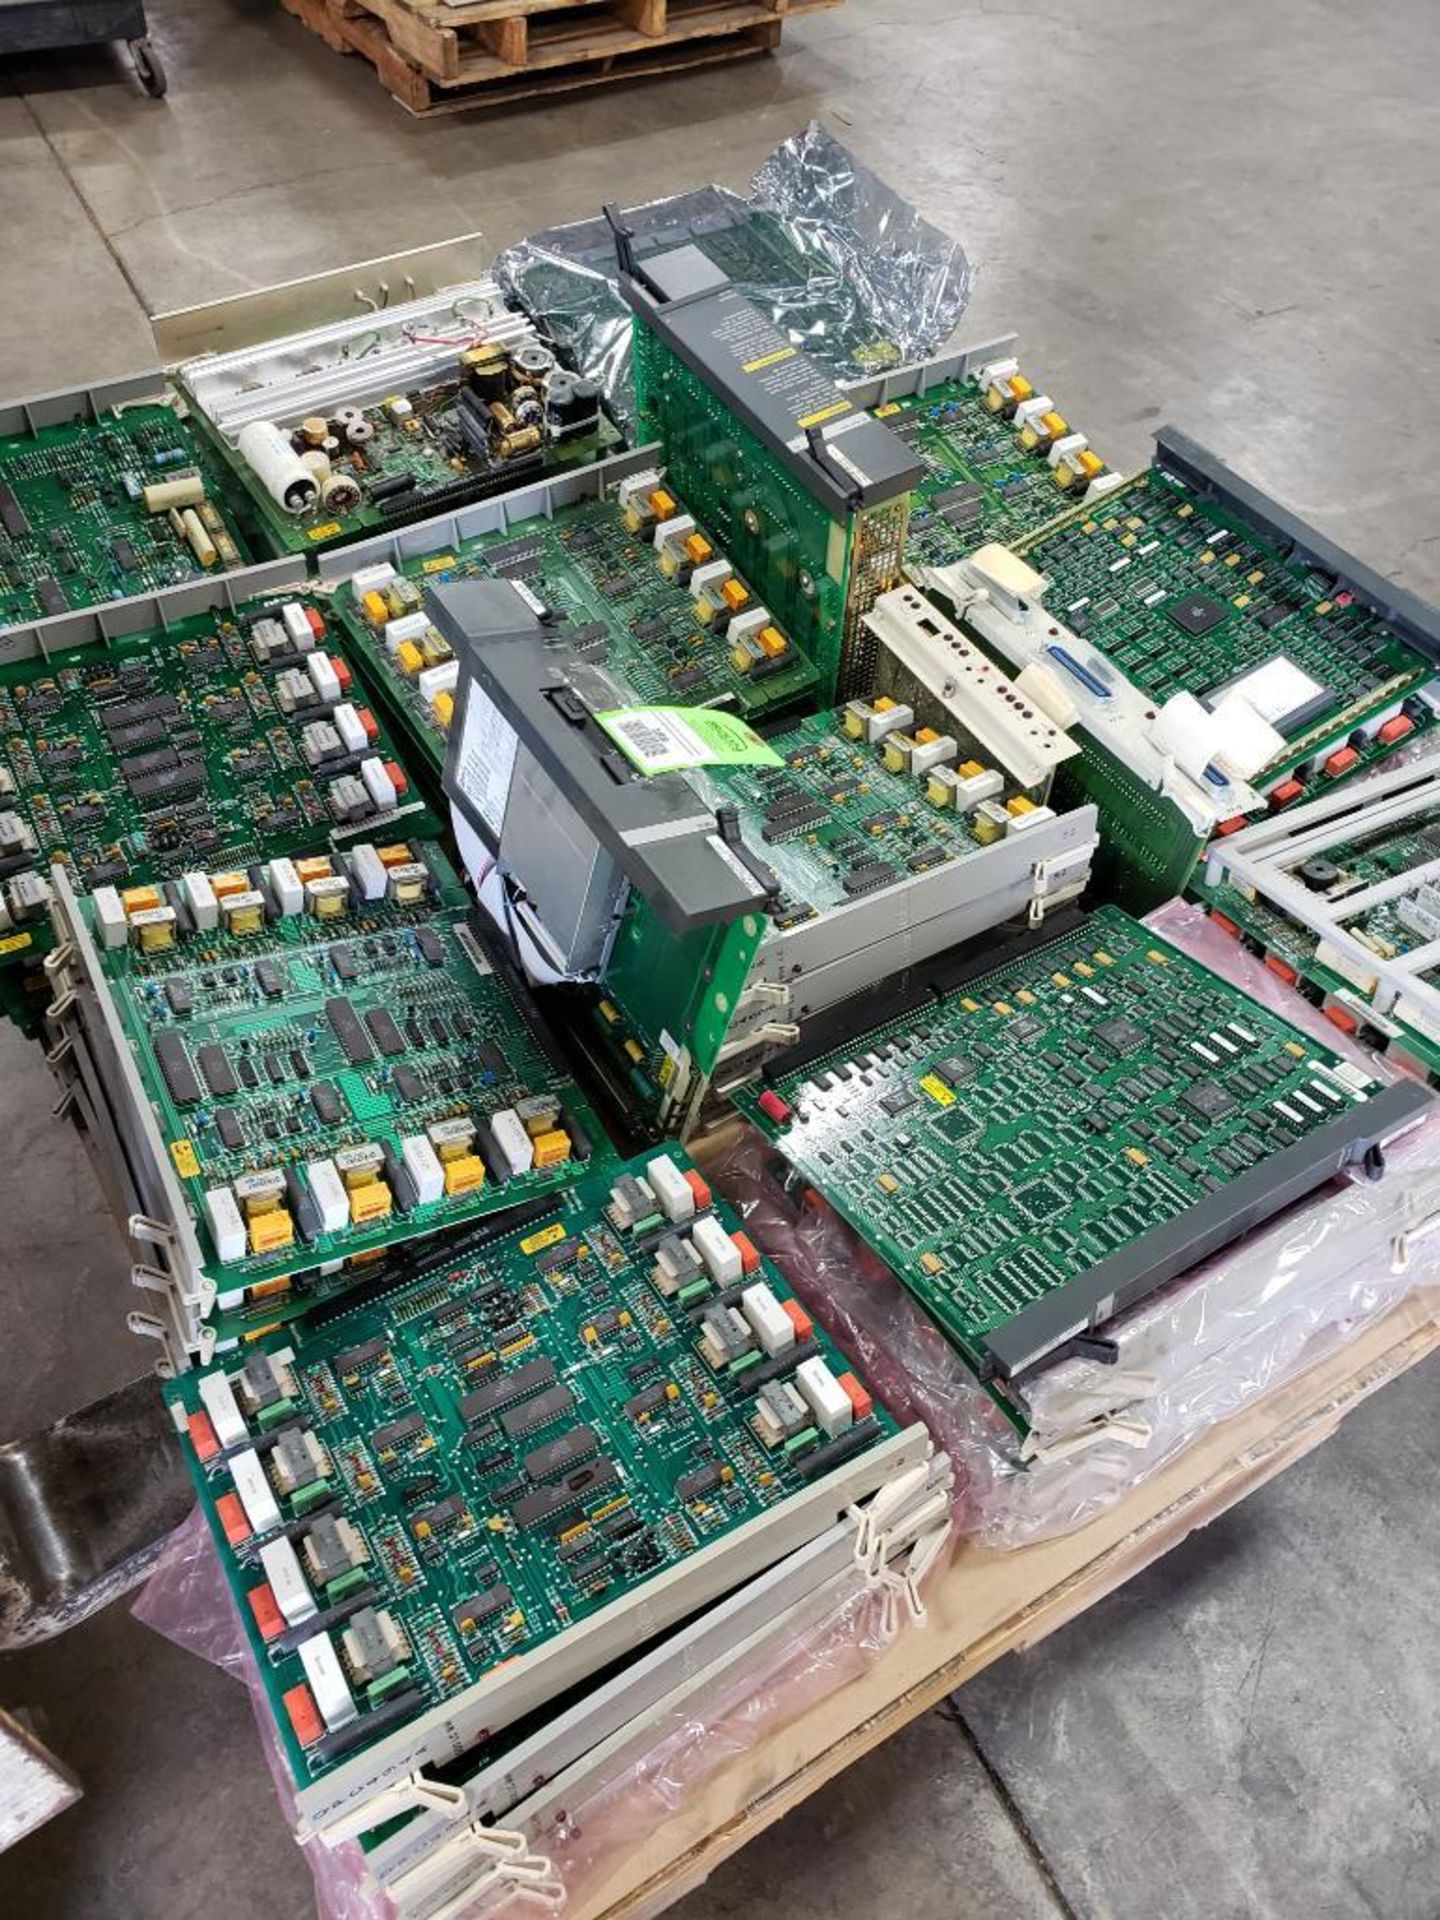 Pallet of assorted electrical and repair parts as pictured.